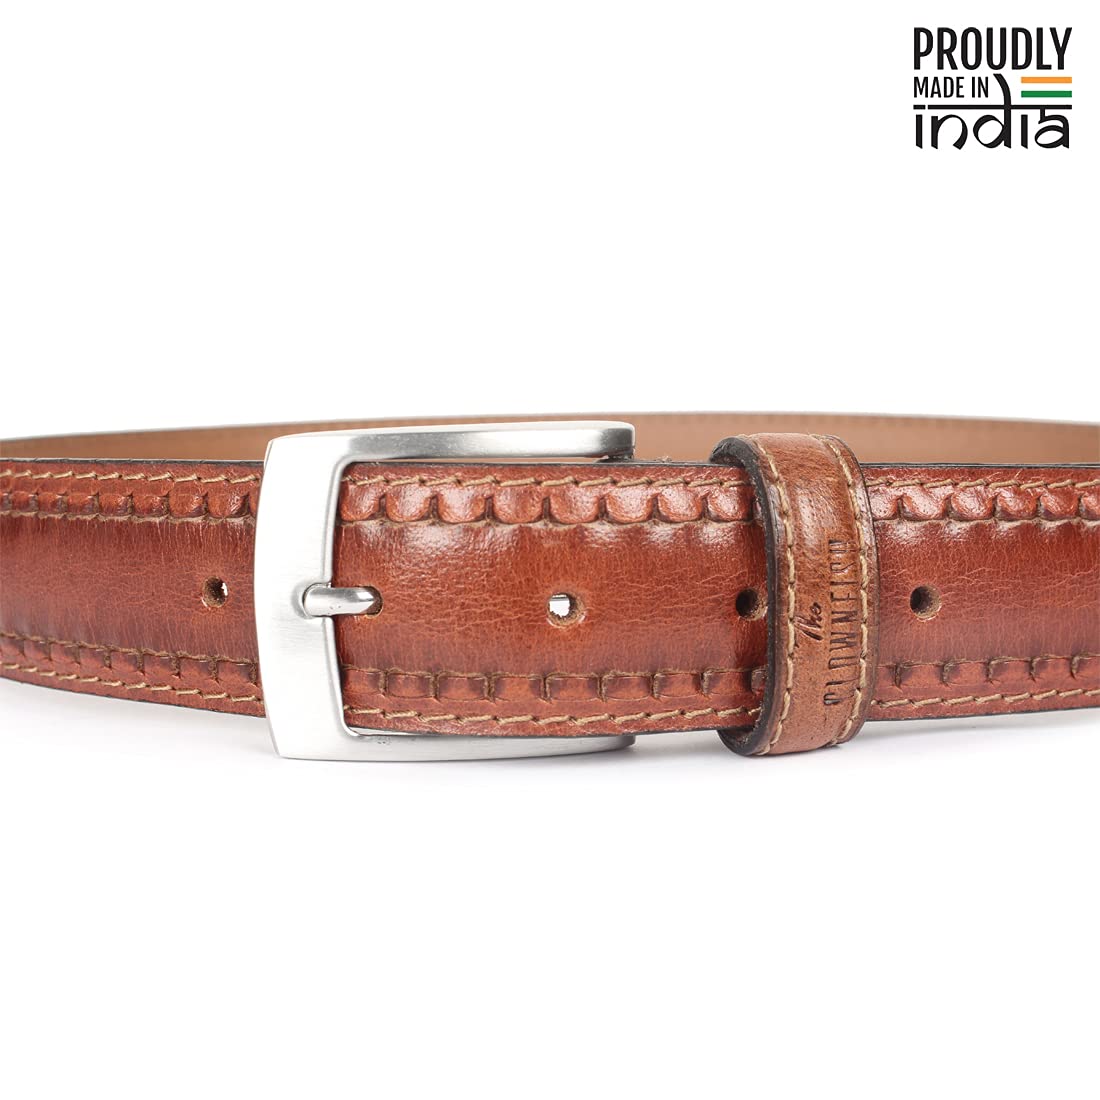 THE CLOWNFISH Men's Genuine Leather Belt with Textured/Embossed Design-Tan (Size-36 inches)